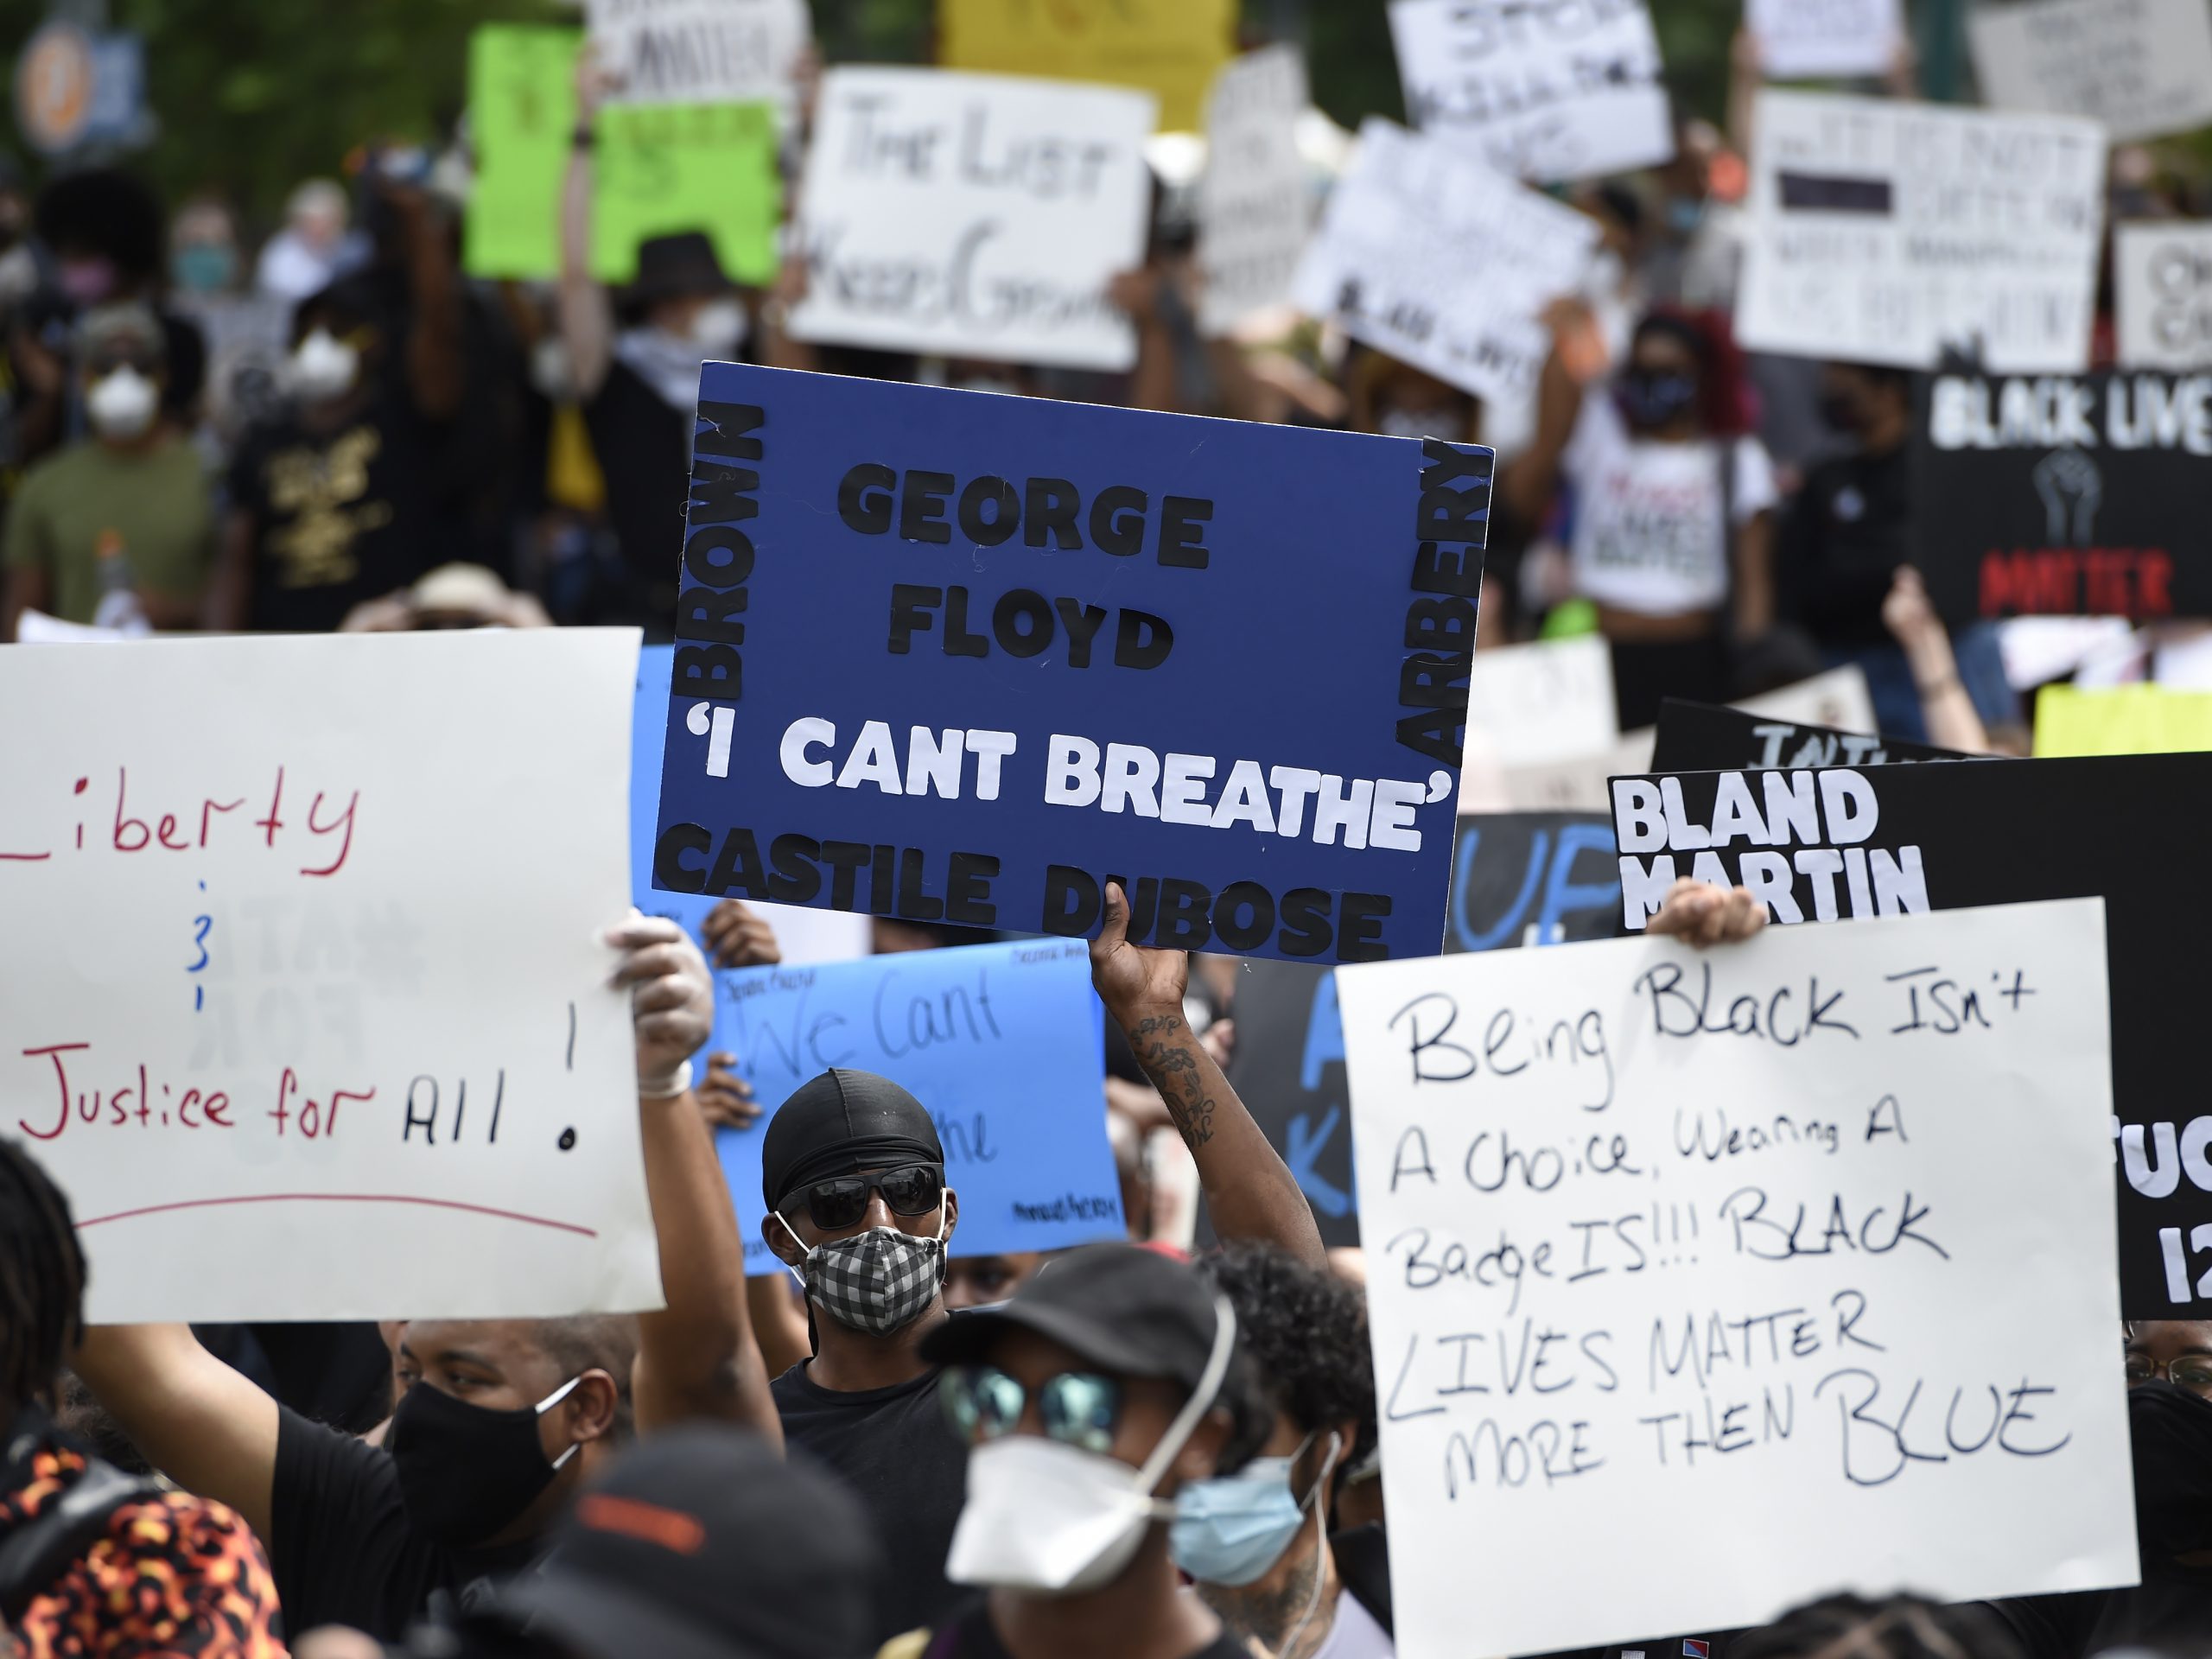 Demonstrators protest Friday in Centennial Olympic Park in Atlanta. Protests were organized in cities around the United States following the death of George Floyd during an arrest in Minneapolis. Former police officer Derek Chauvin was charged Friday with third-degree murder and manslaughter in the incident.